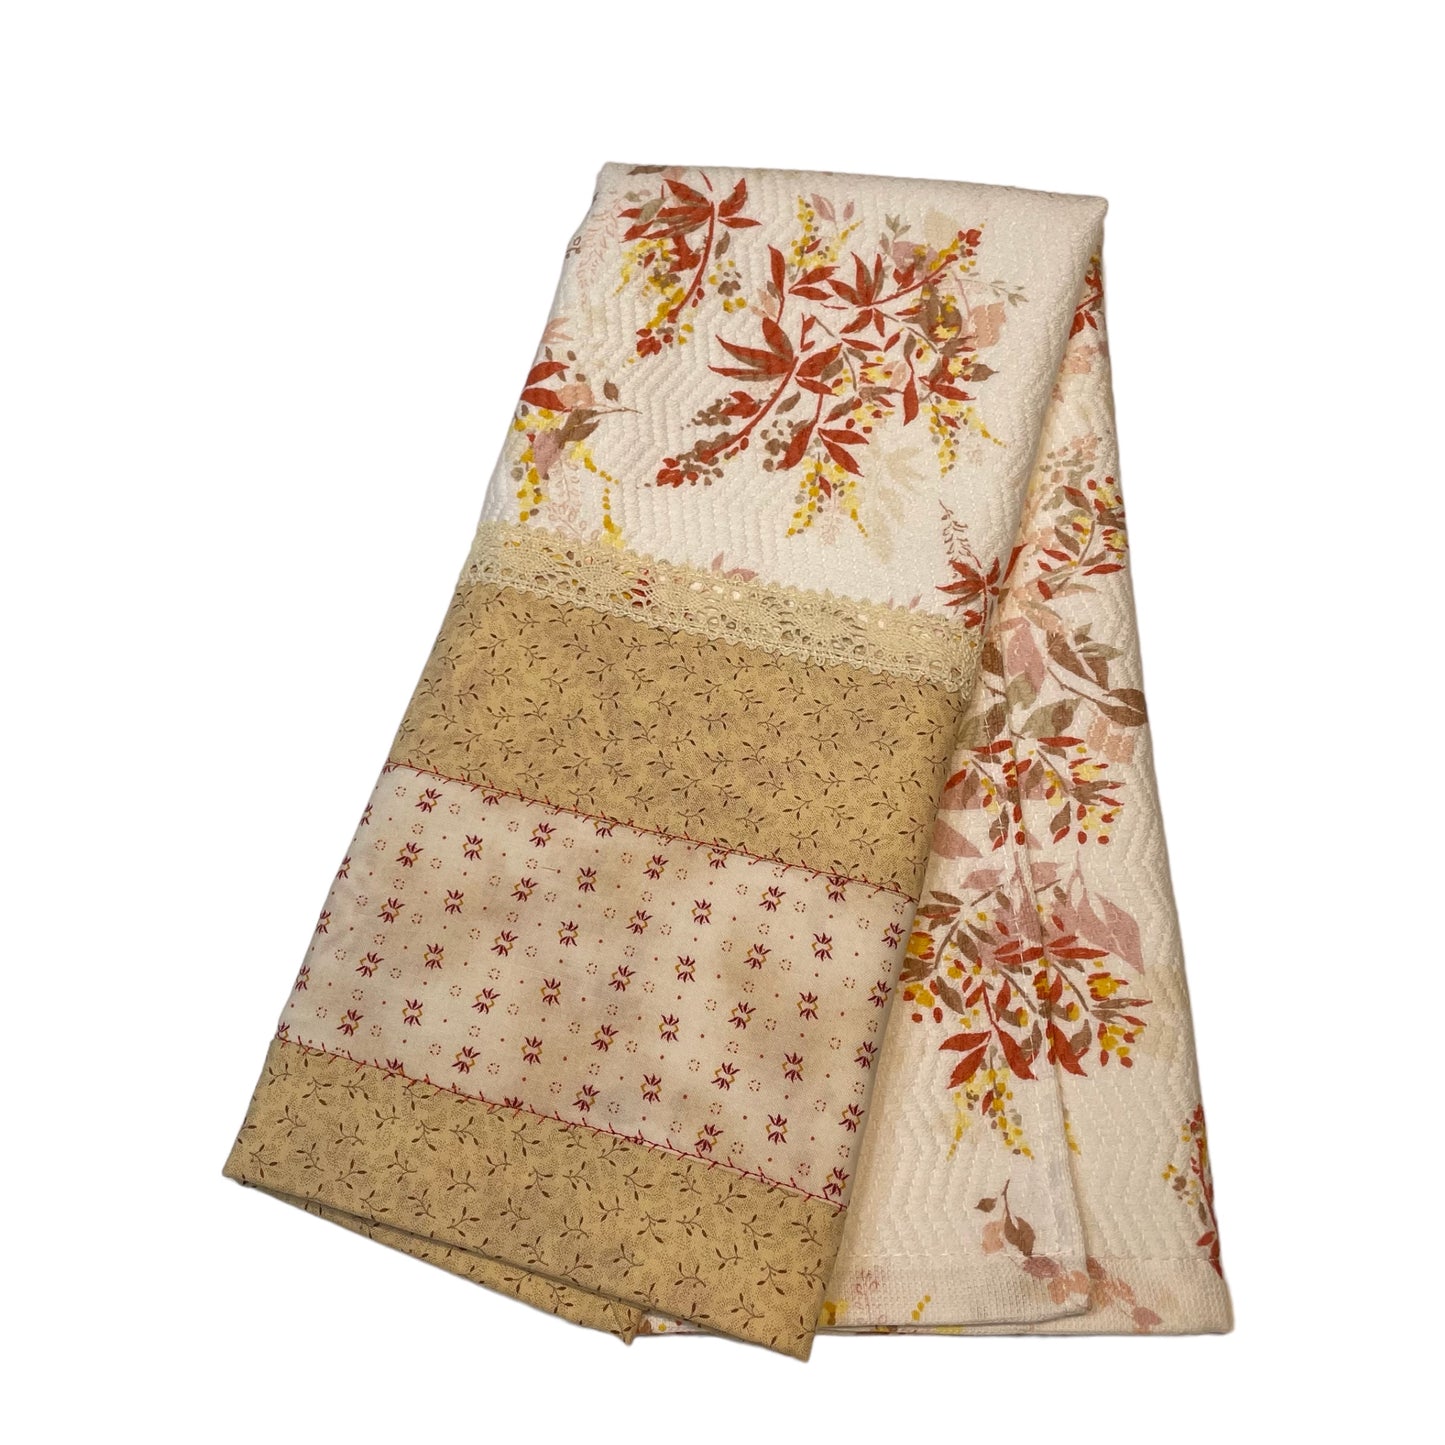 Handcrafted Orange and White Floral Kitchen Towel with Quilting Cotton Detail